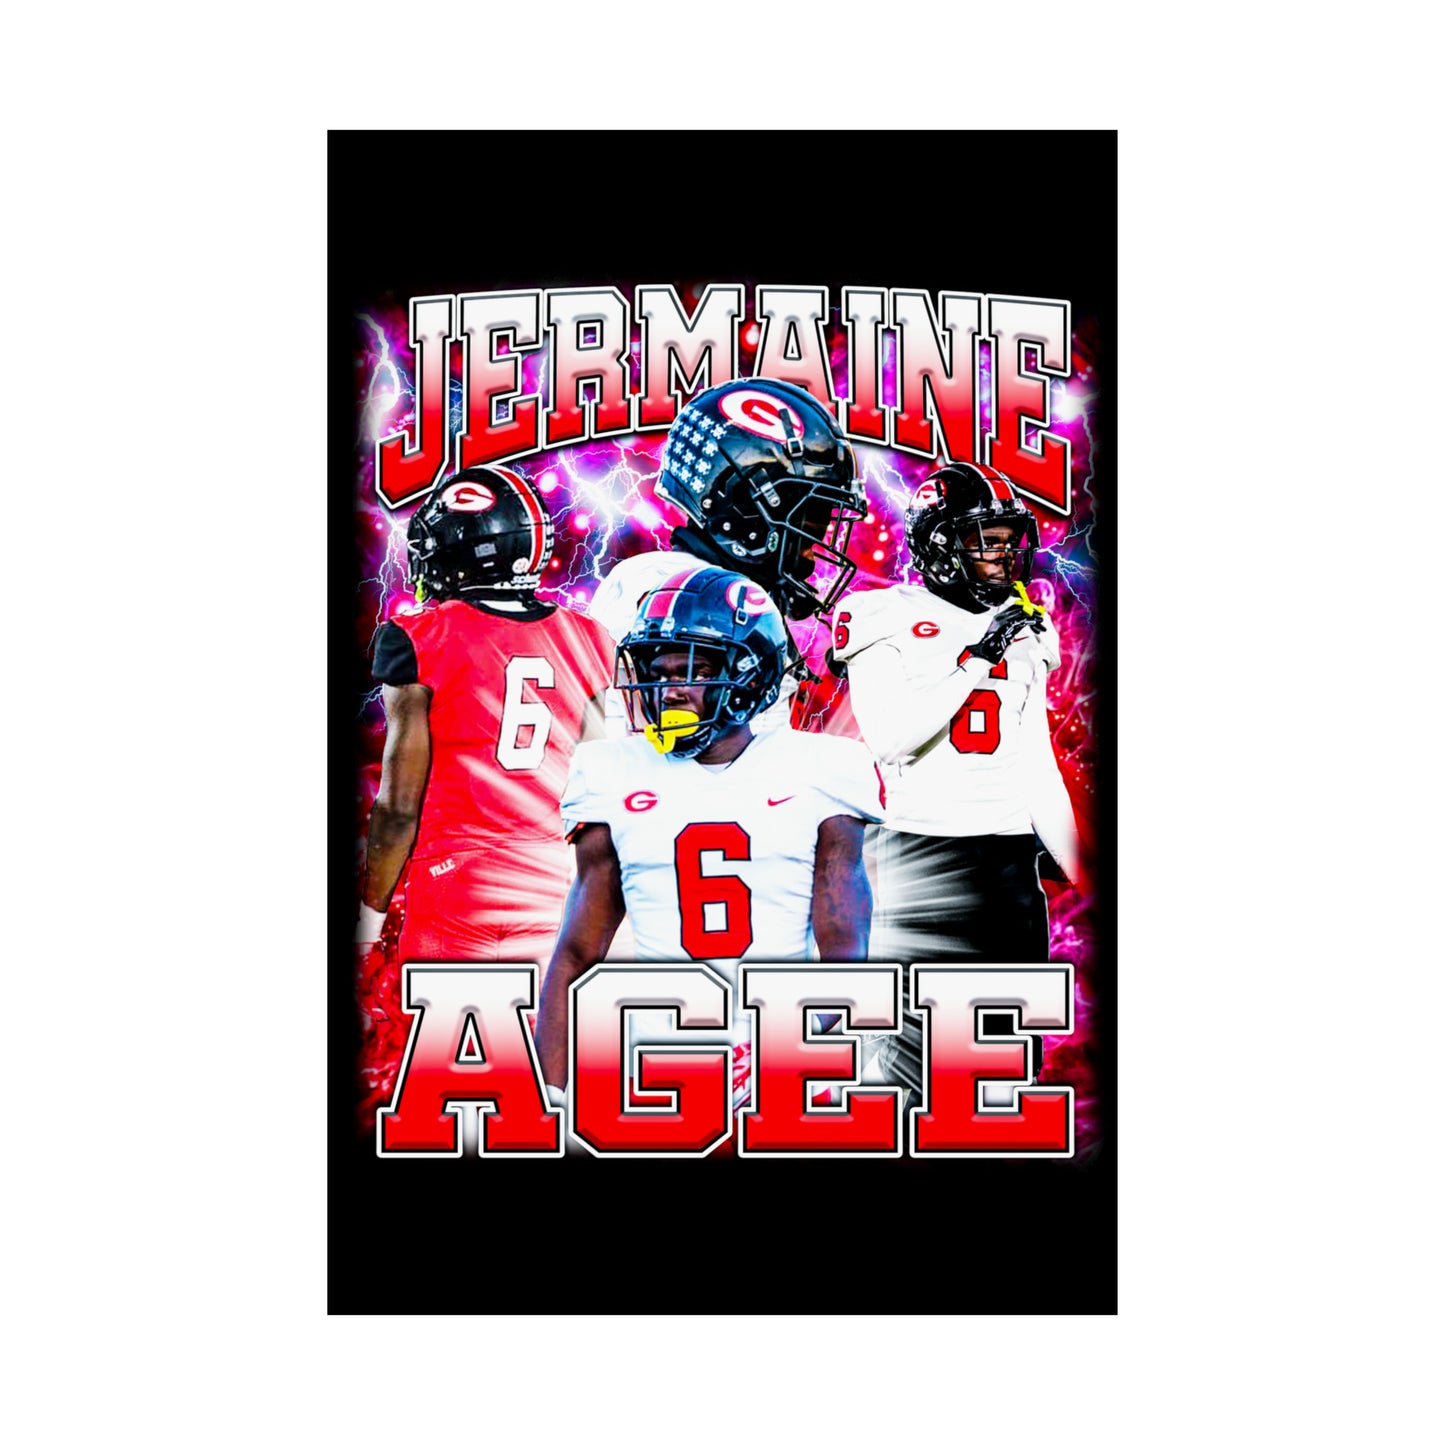 Jermaine Agee Poster